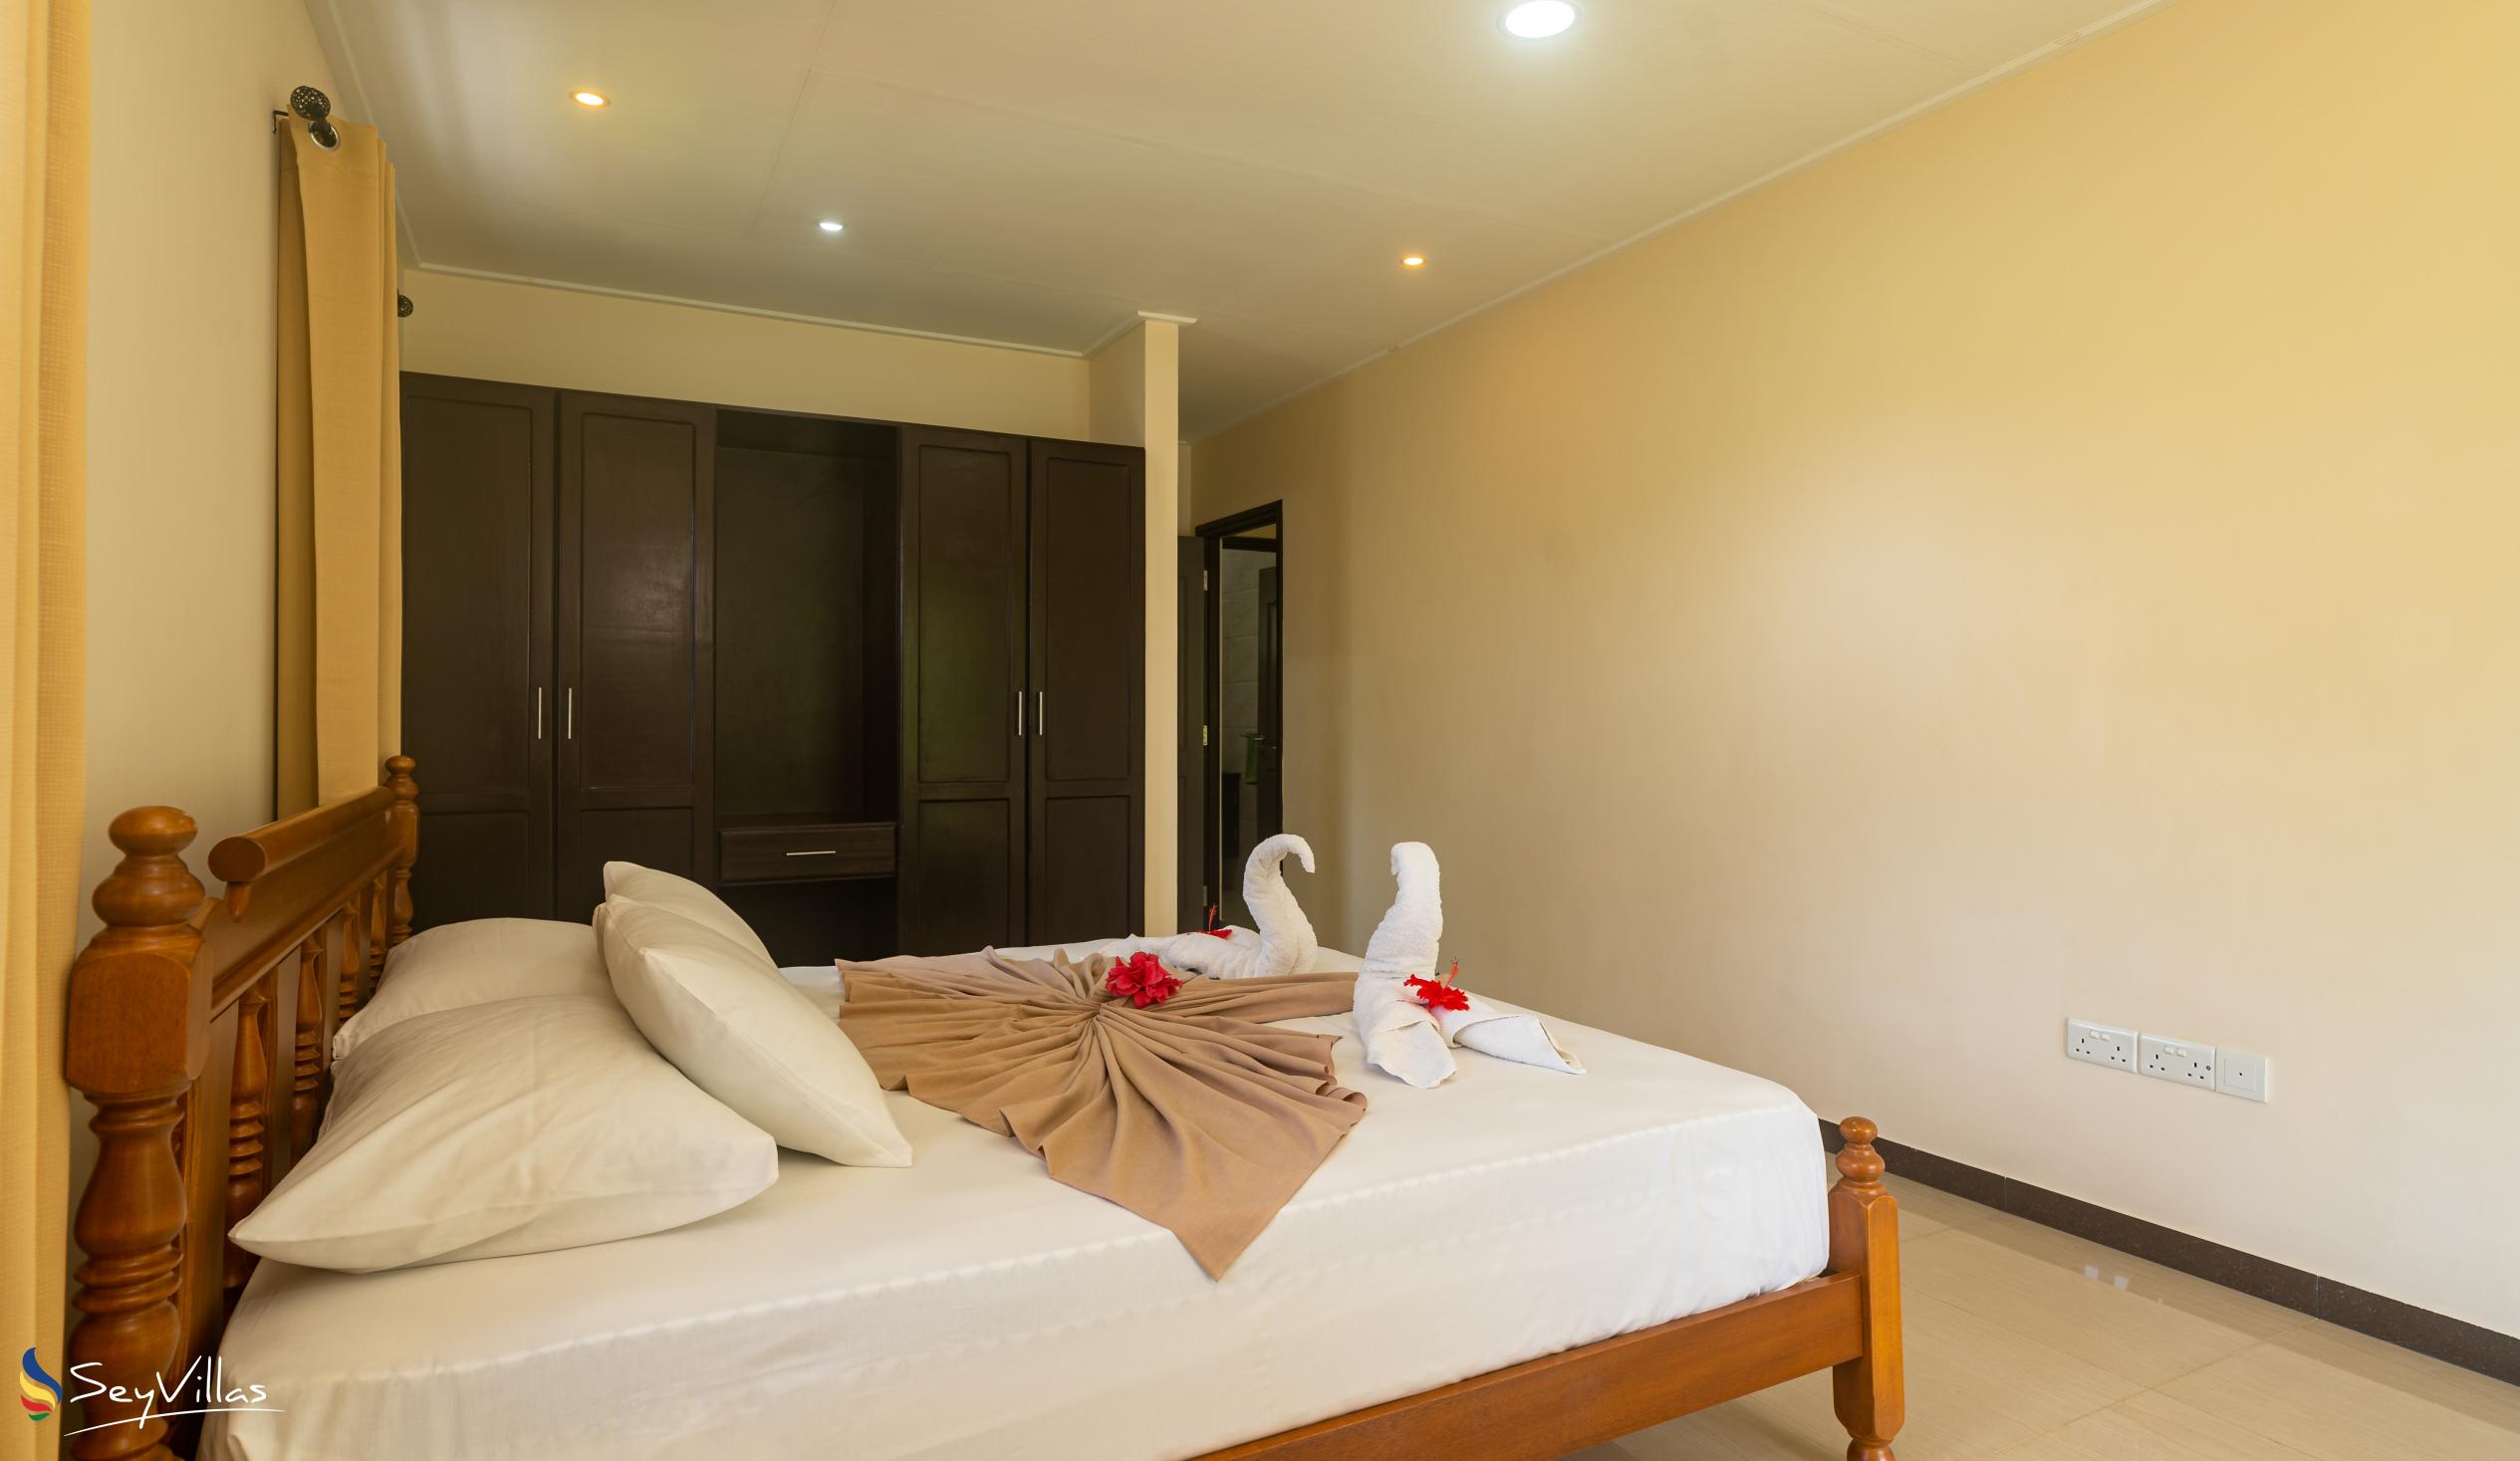 Foto 57: JAIDSS Holiday Apartments - Appartement 2 chambres - Mahé (Seychelles)